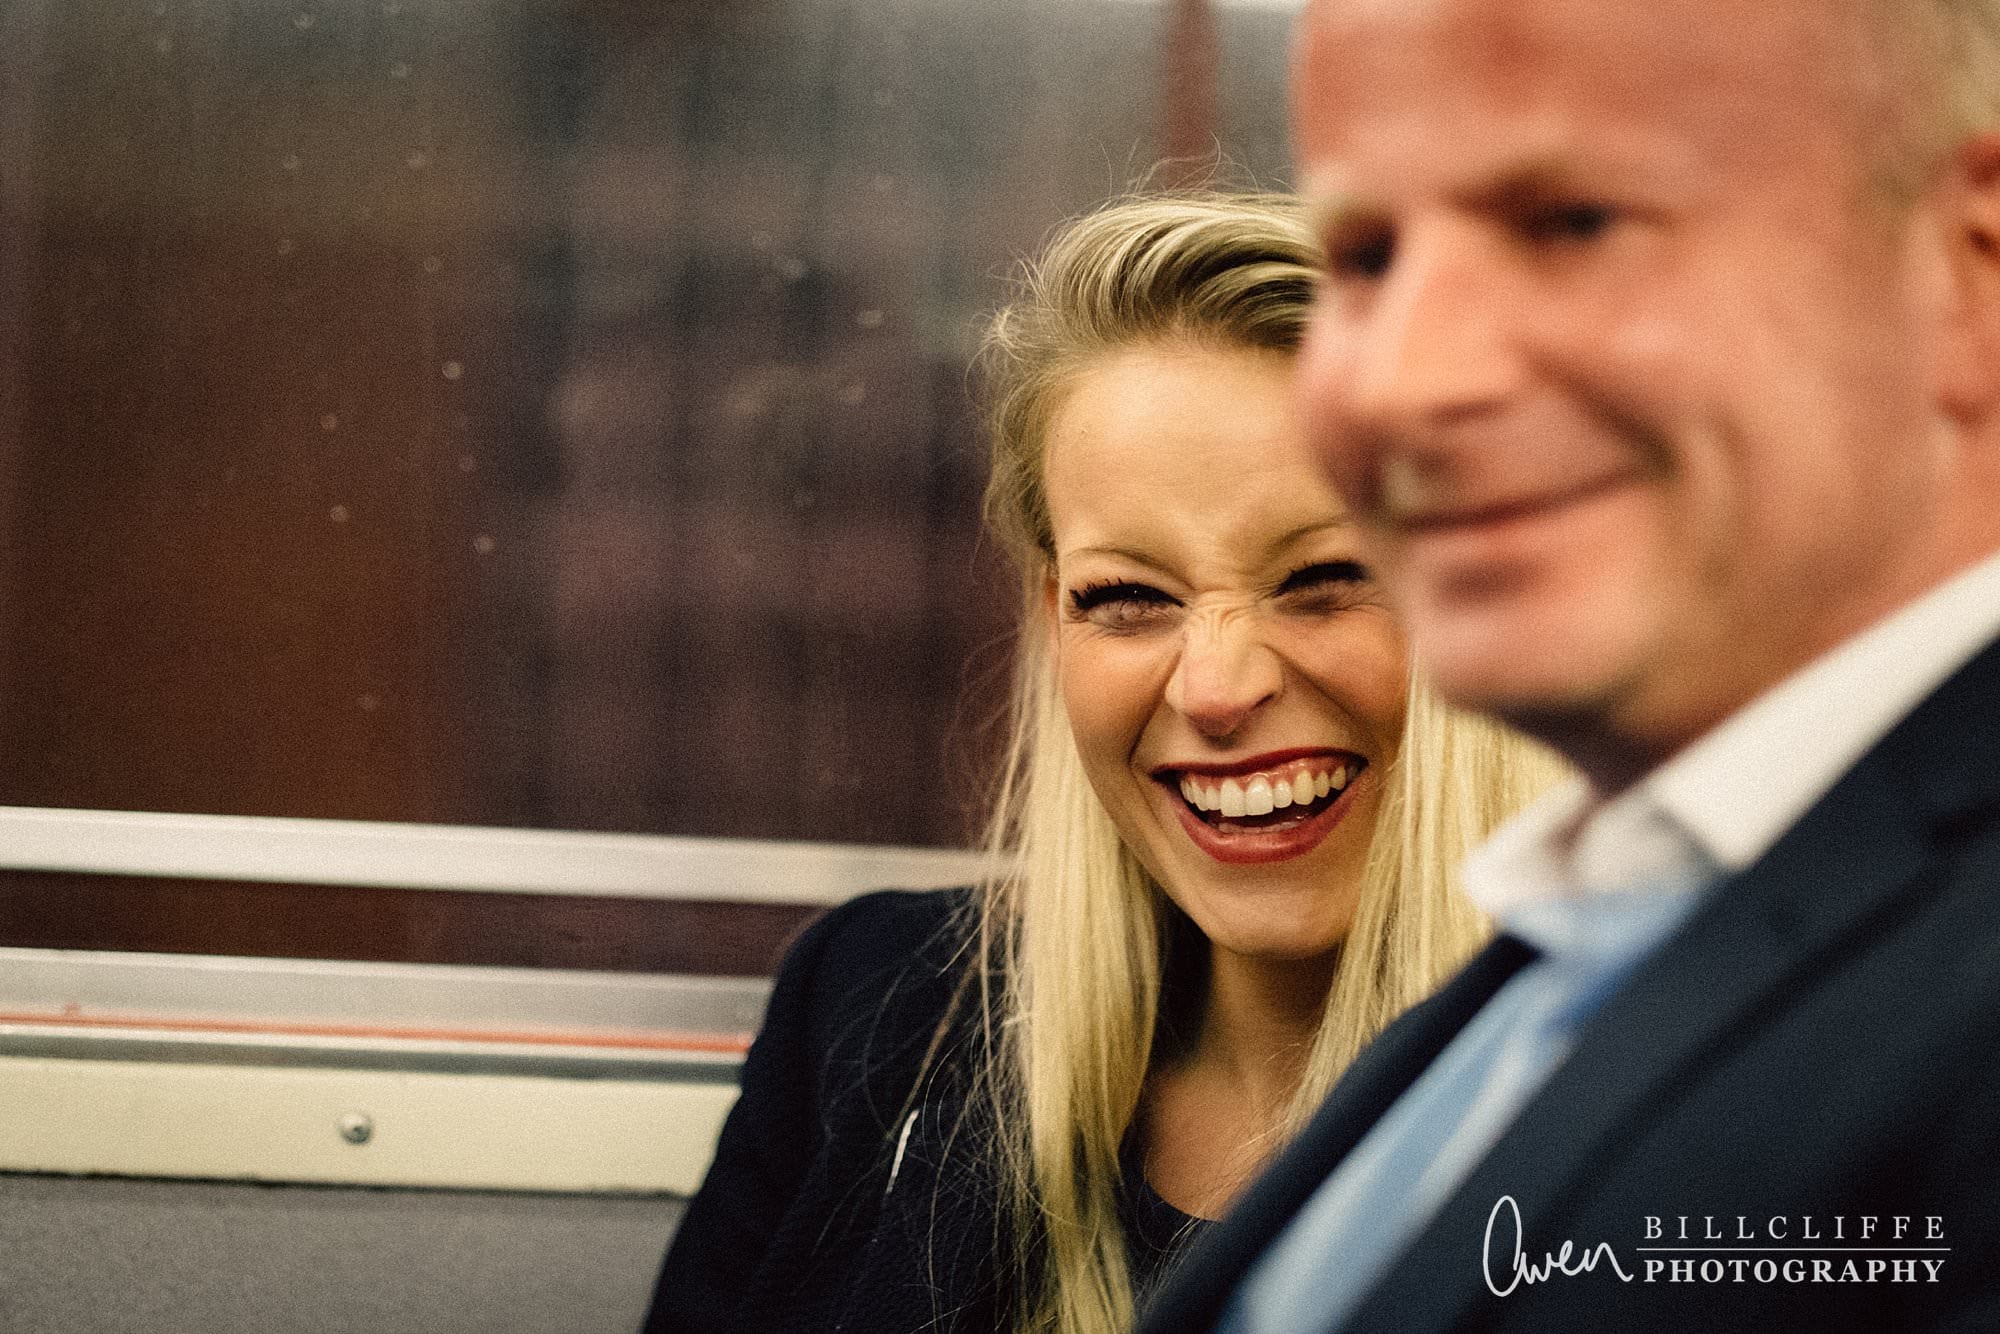 london engagement proposal photographer routemaster RE 019 - When Richard Proposed To Emma on a London Routemaster Bus